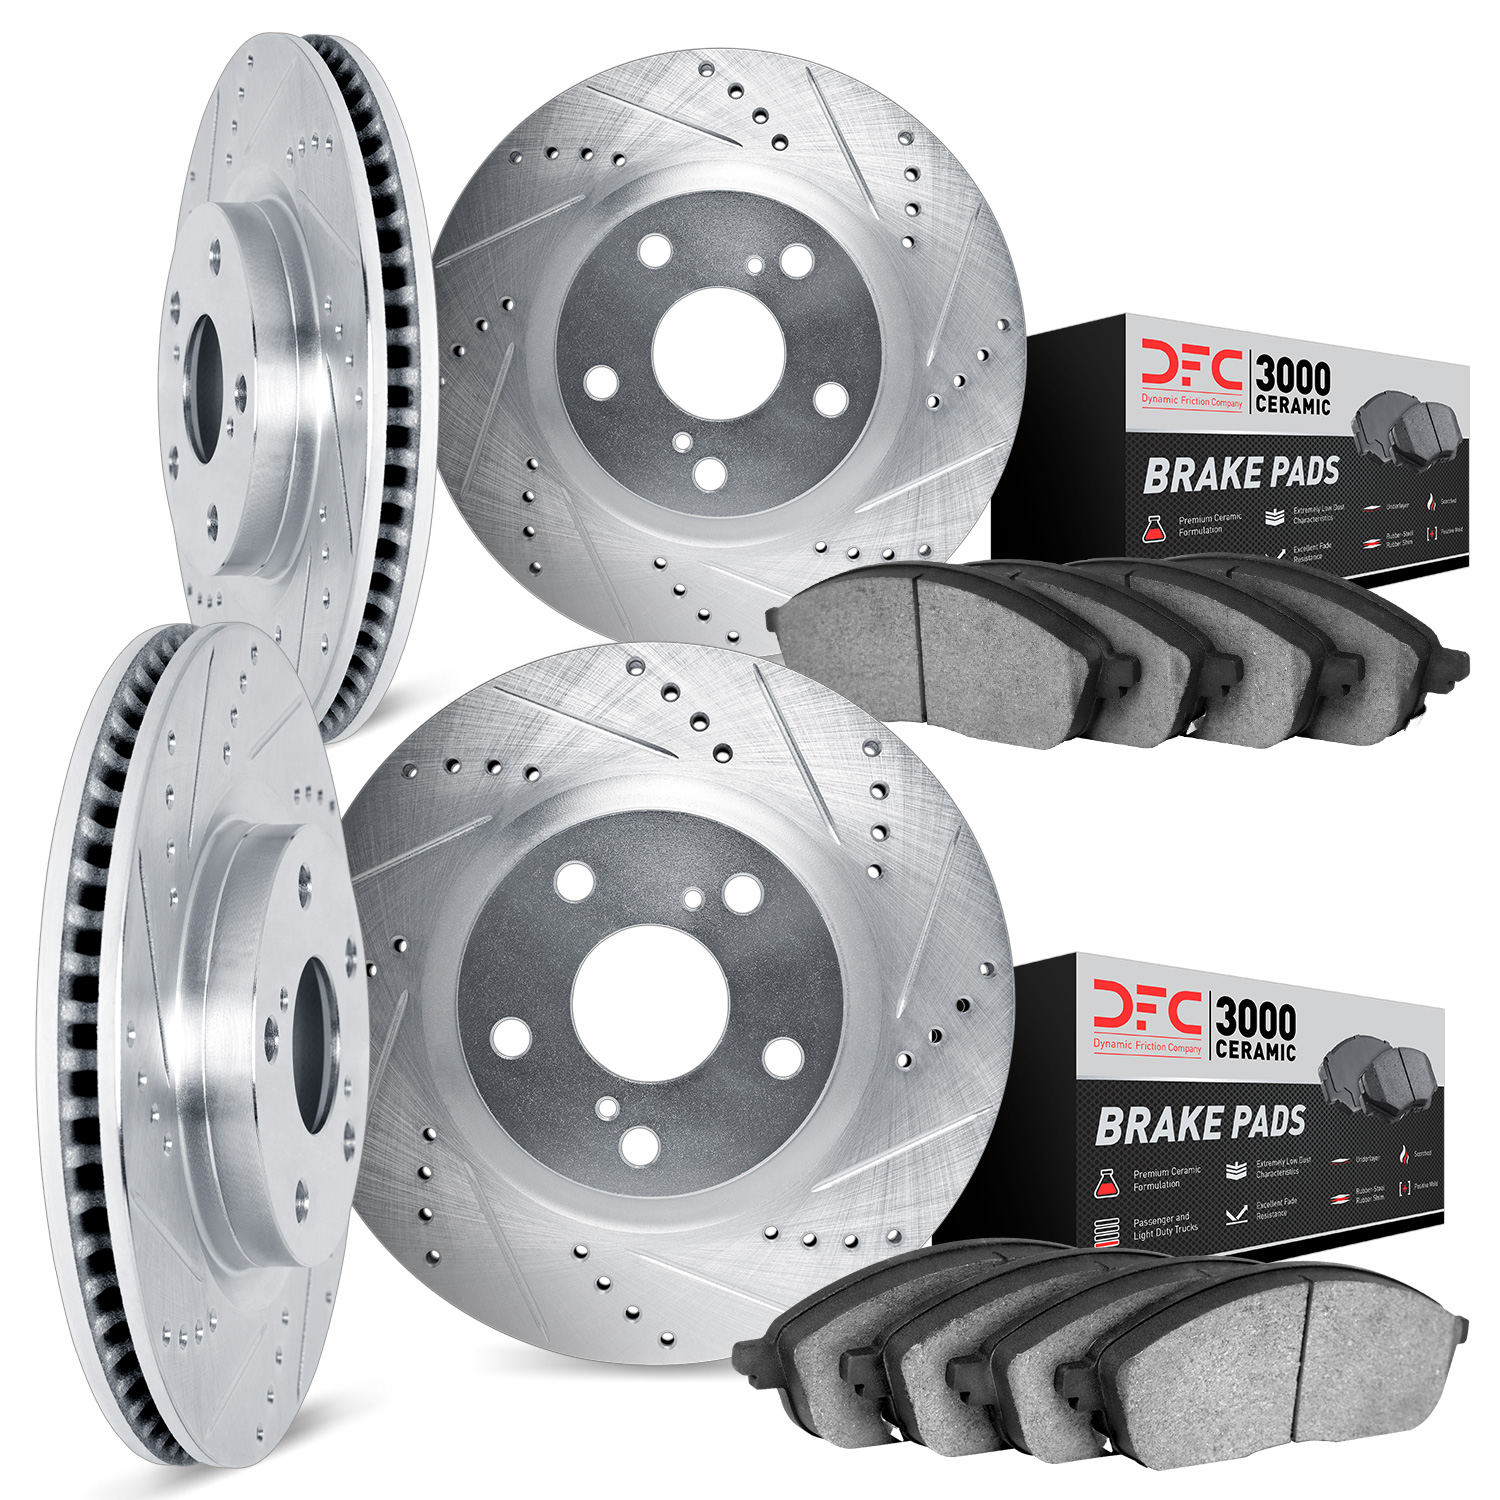 7304-80025 Drilled/Slotted Brake Rotor with 3000-Series Ceramic Brake Pads Kit [Silver], 2004-2008 Ford/Lincoln/Mercury/Mazda, P